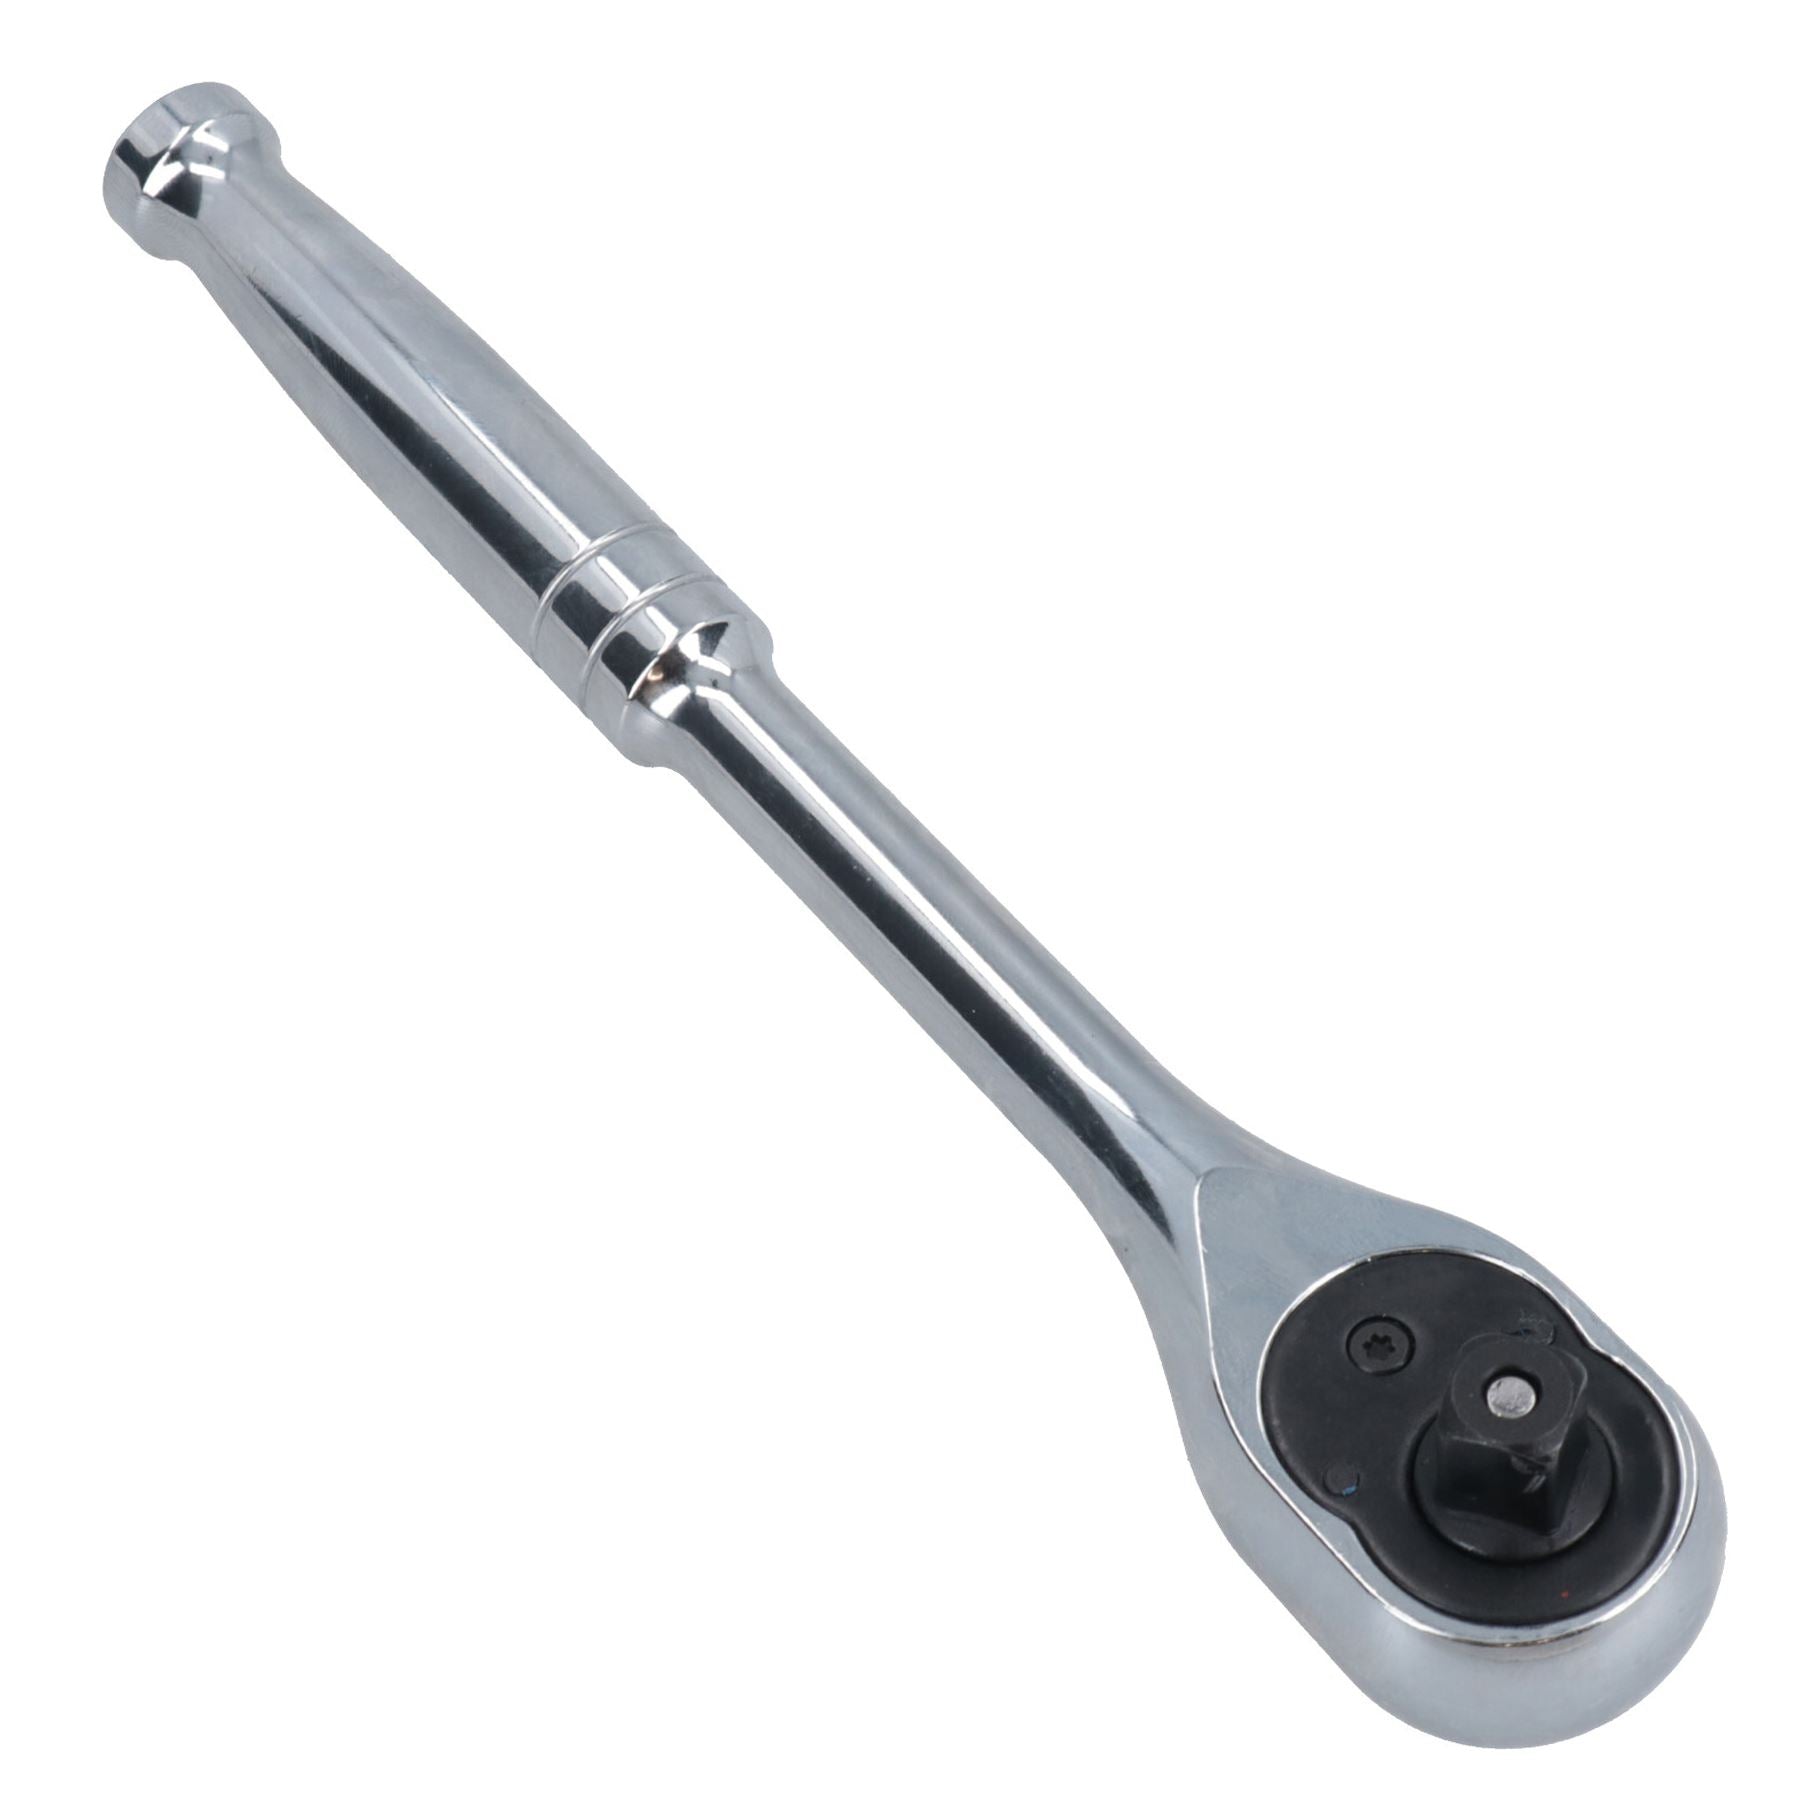 3/8in. Drive Ratchet with Straight Handle 90 Teeth Quick Release Reversible